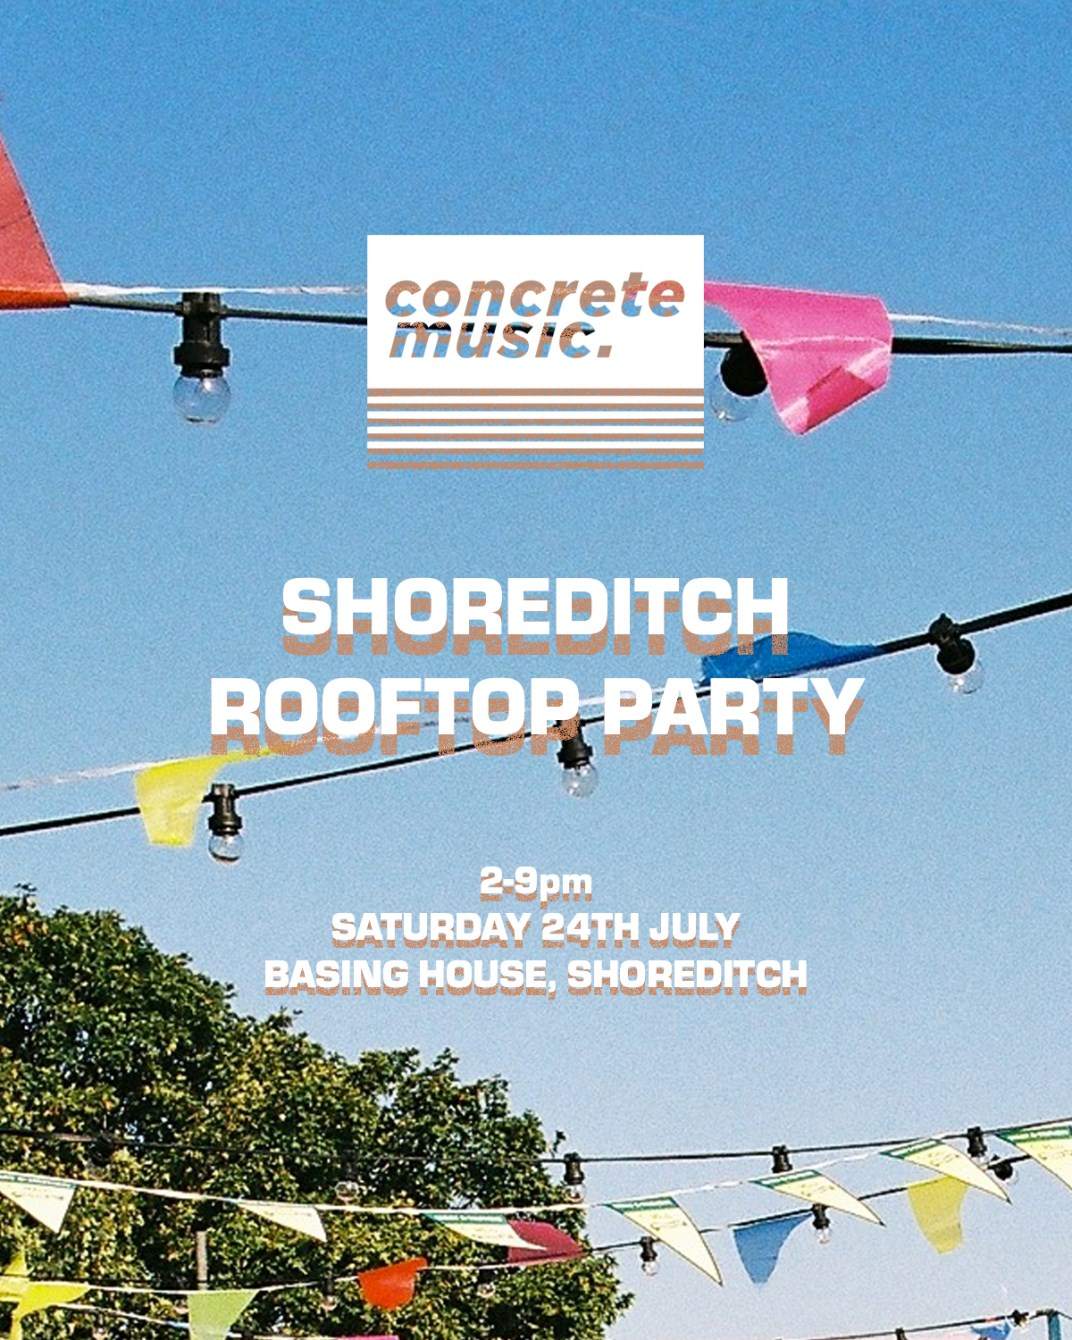 Concrete Music Shoreditch Rooftop Party - フライヤー表